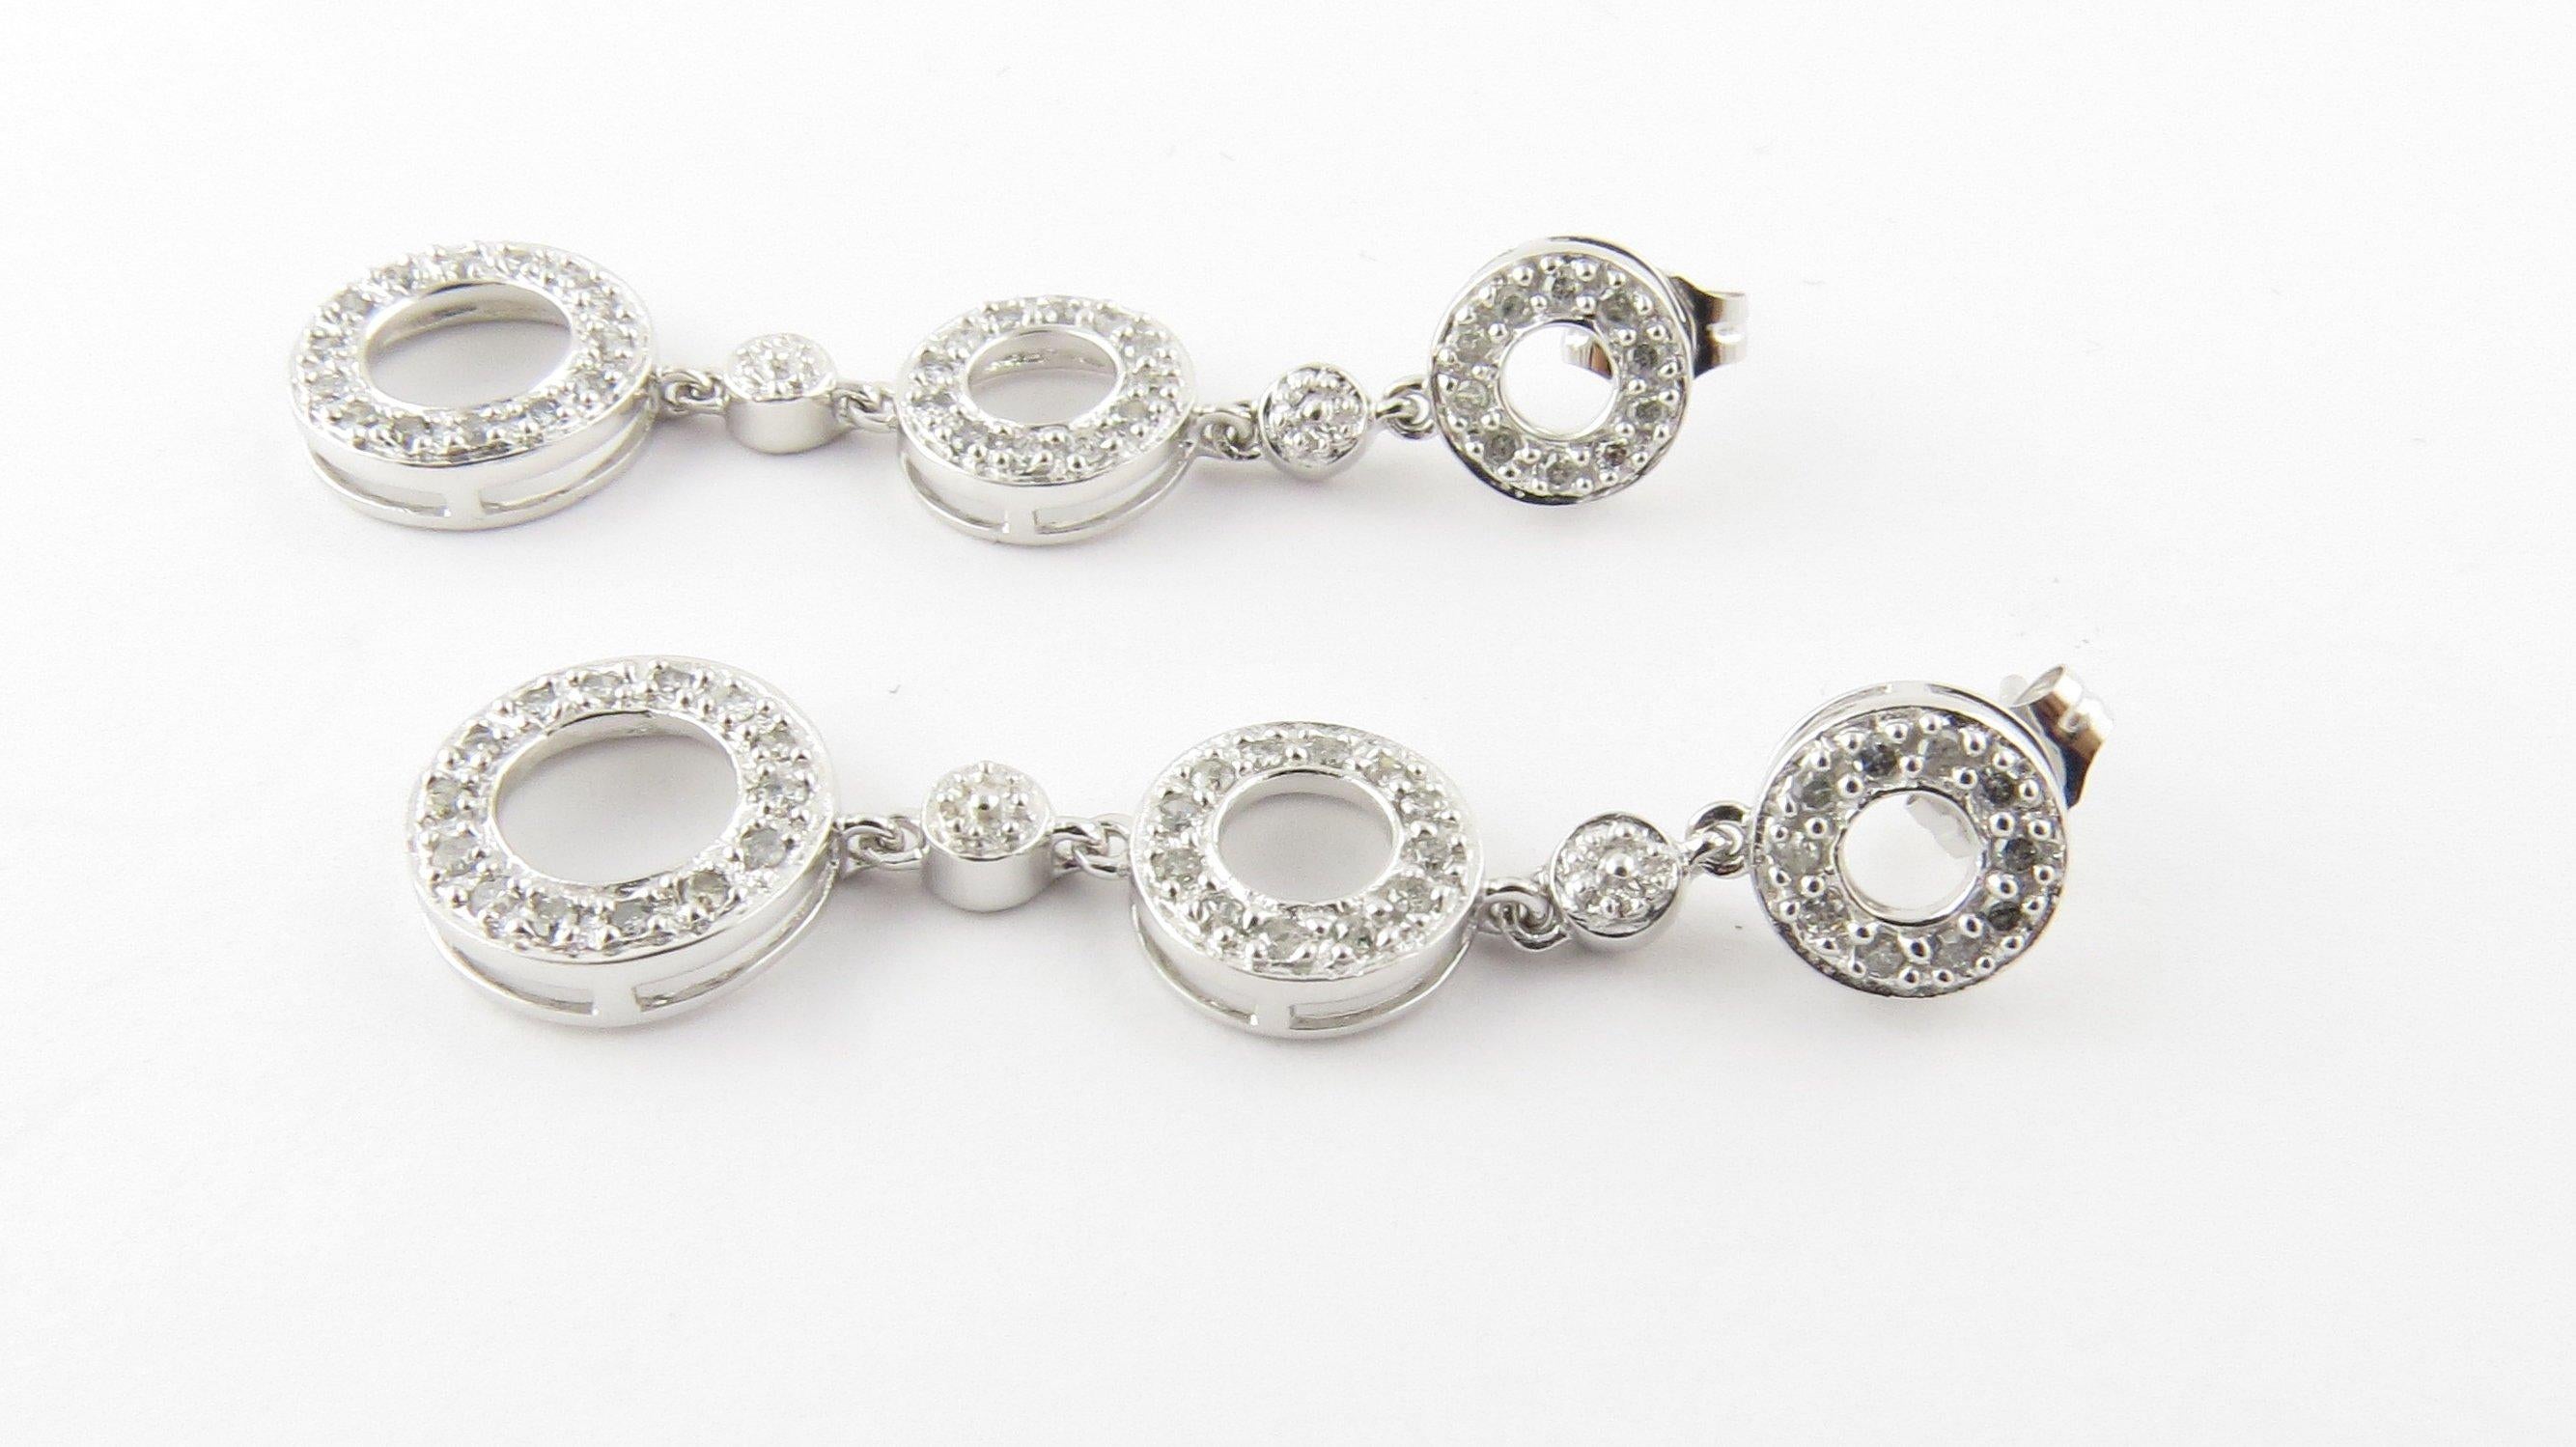 Vintage 10 Karat White Gold and Diamond Earrings- These lovely dangling earrings each feature 36 round single cut diamonds set in classic 10K white gold. Push back closures. Approximate total diamond weight: .72 ct. Diamond color: I-J Diamond